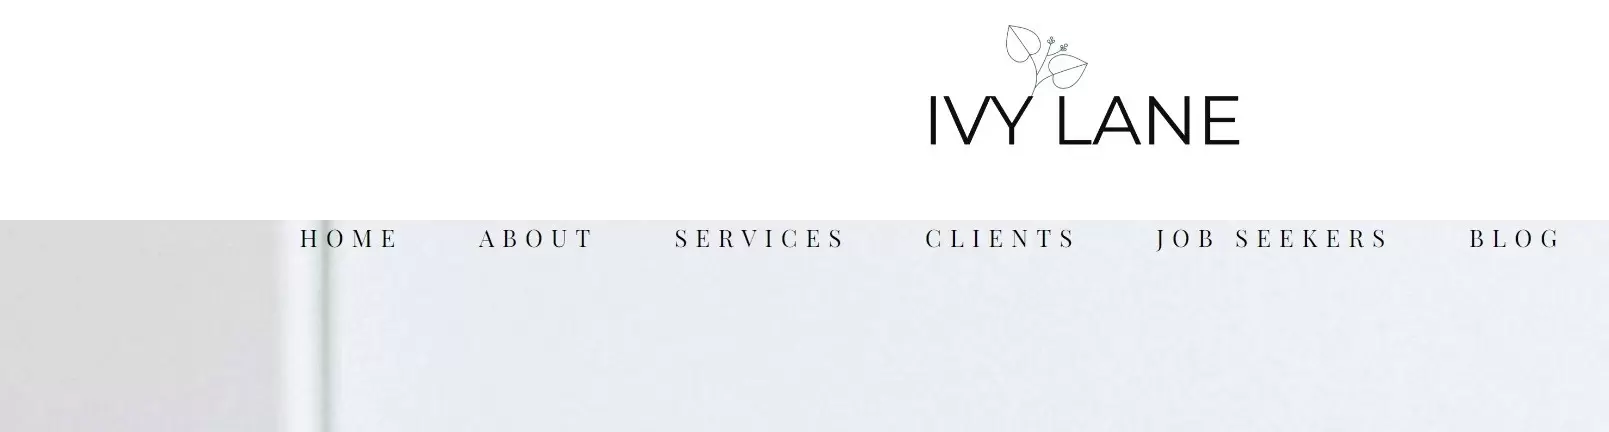 Ivy Lane Staffing company profile and reviews